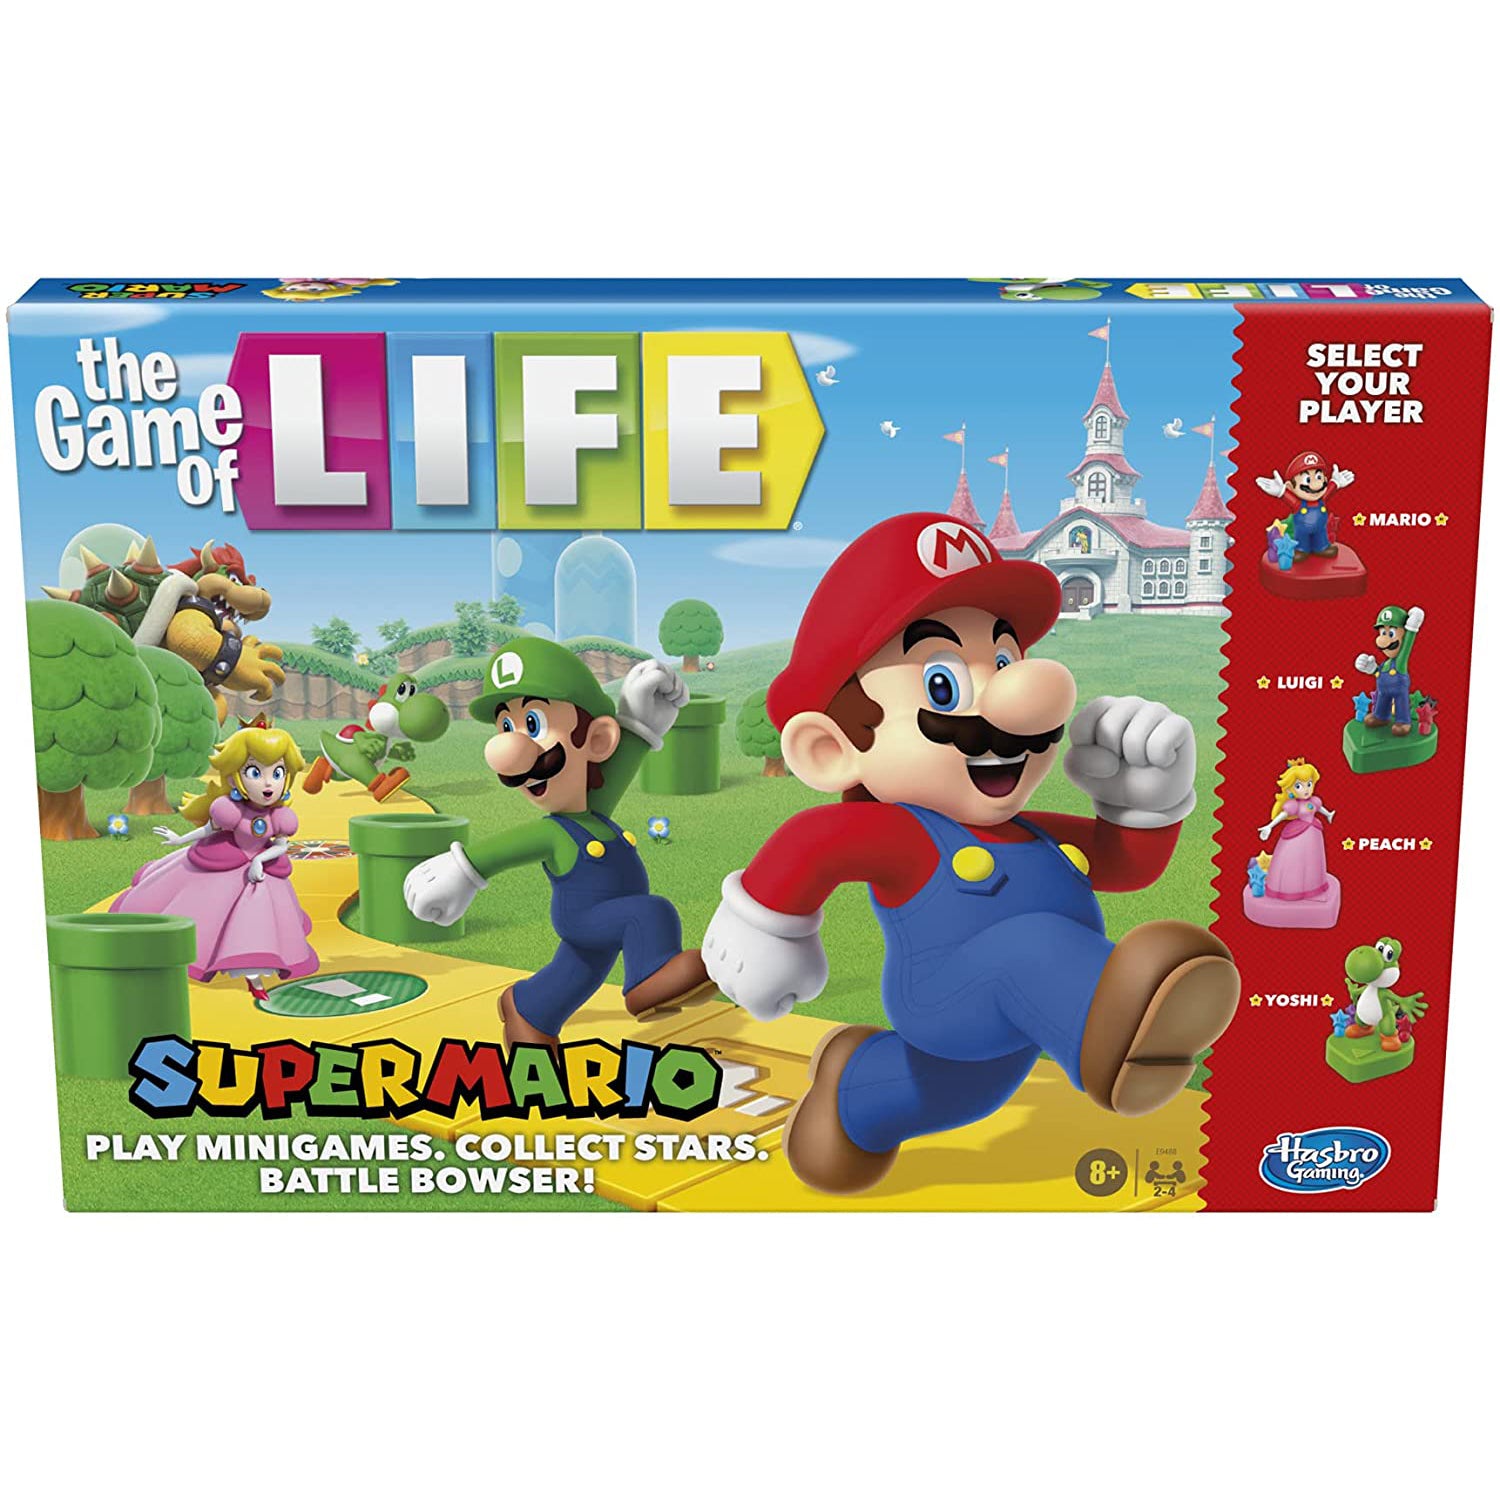 The Game of Life: Super Mario Edition Board Game